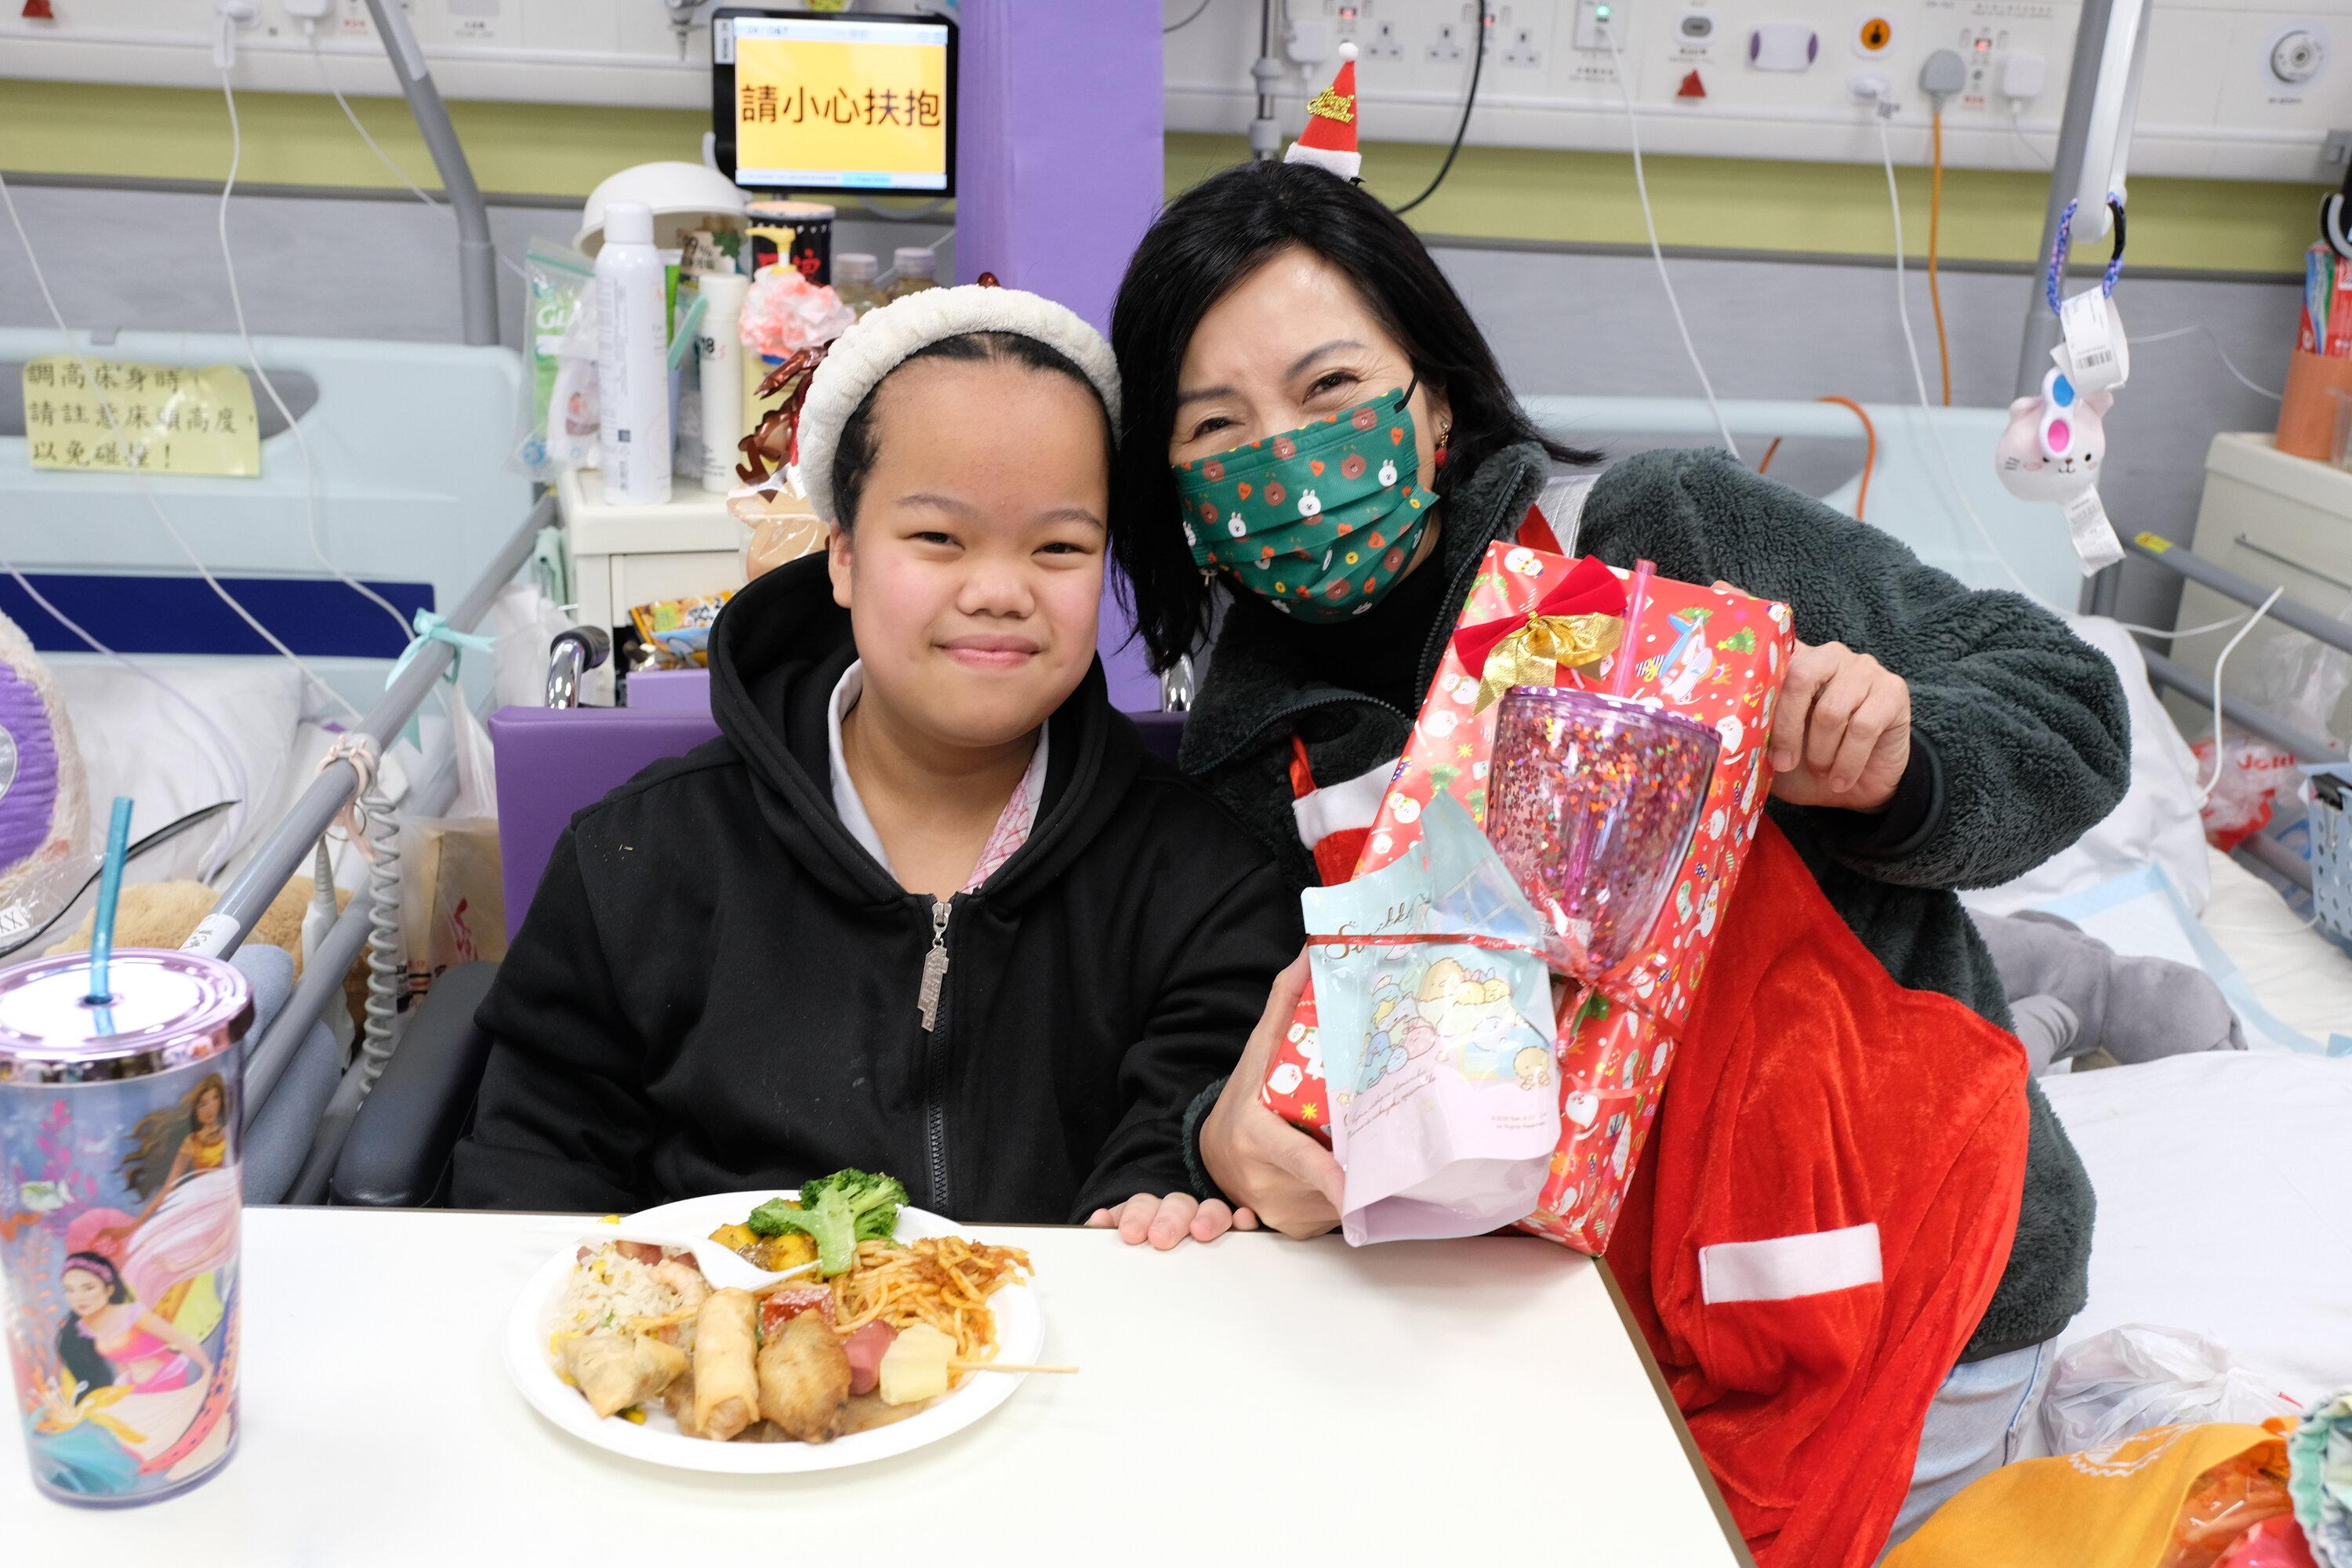 The Duchess of Kent Children's Hospital management distributed Christmas meals to the hospitalised children and presented them with Christmas gifts, bringing joy to the young patients during the Christmas time.
